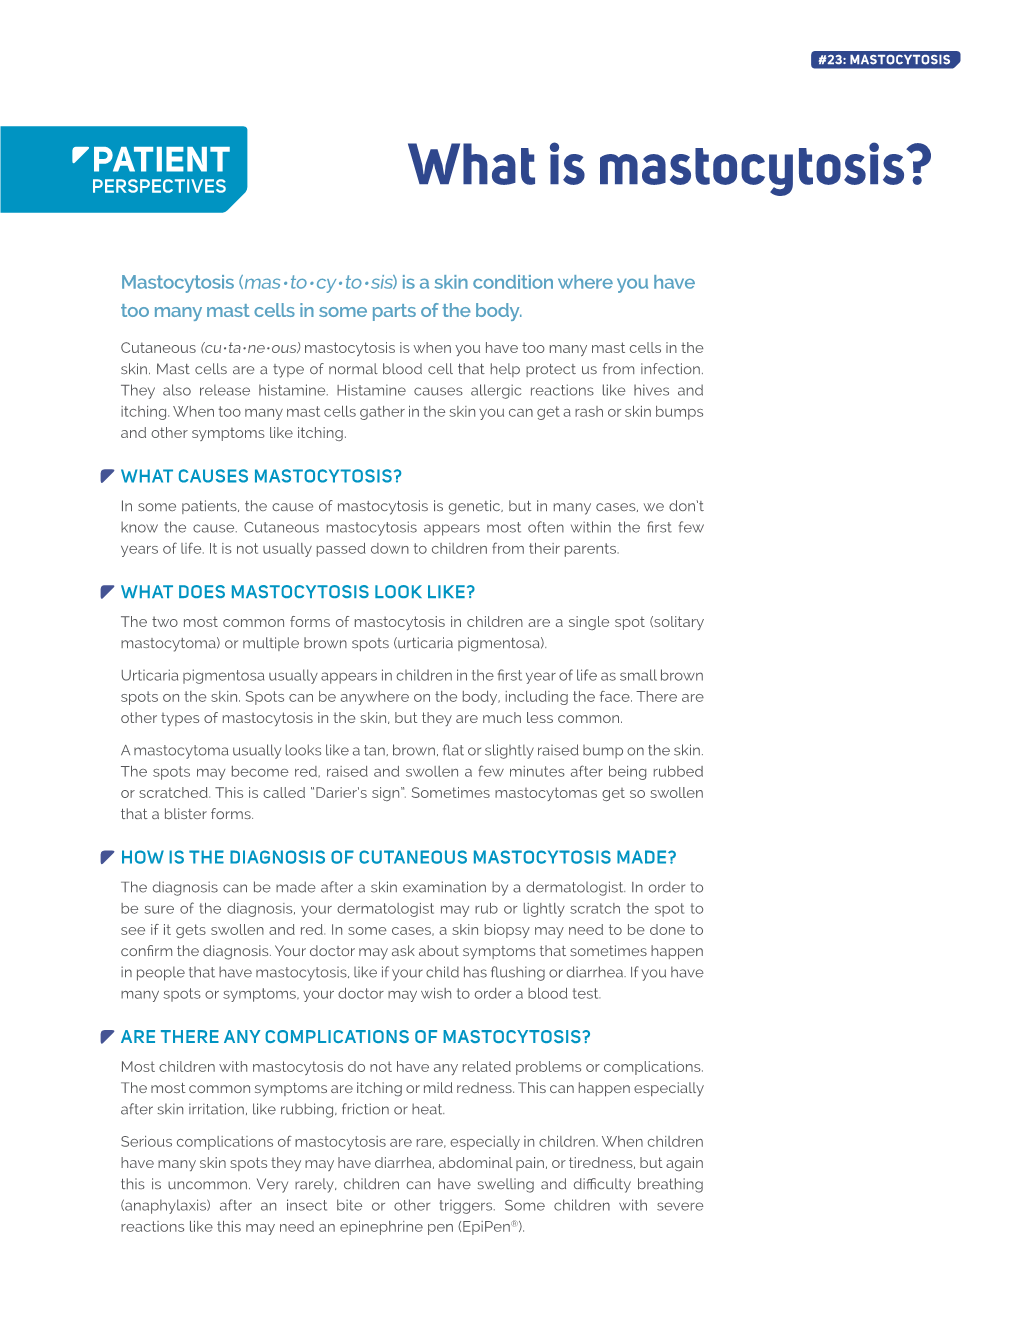 What Is Mastocytosis?